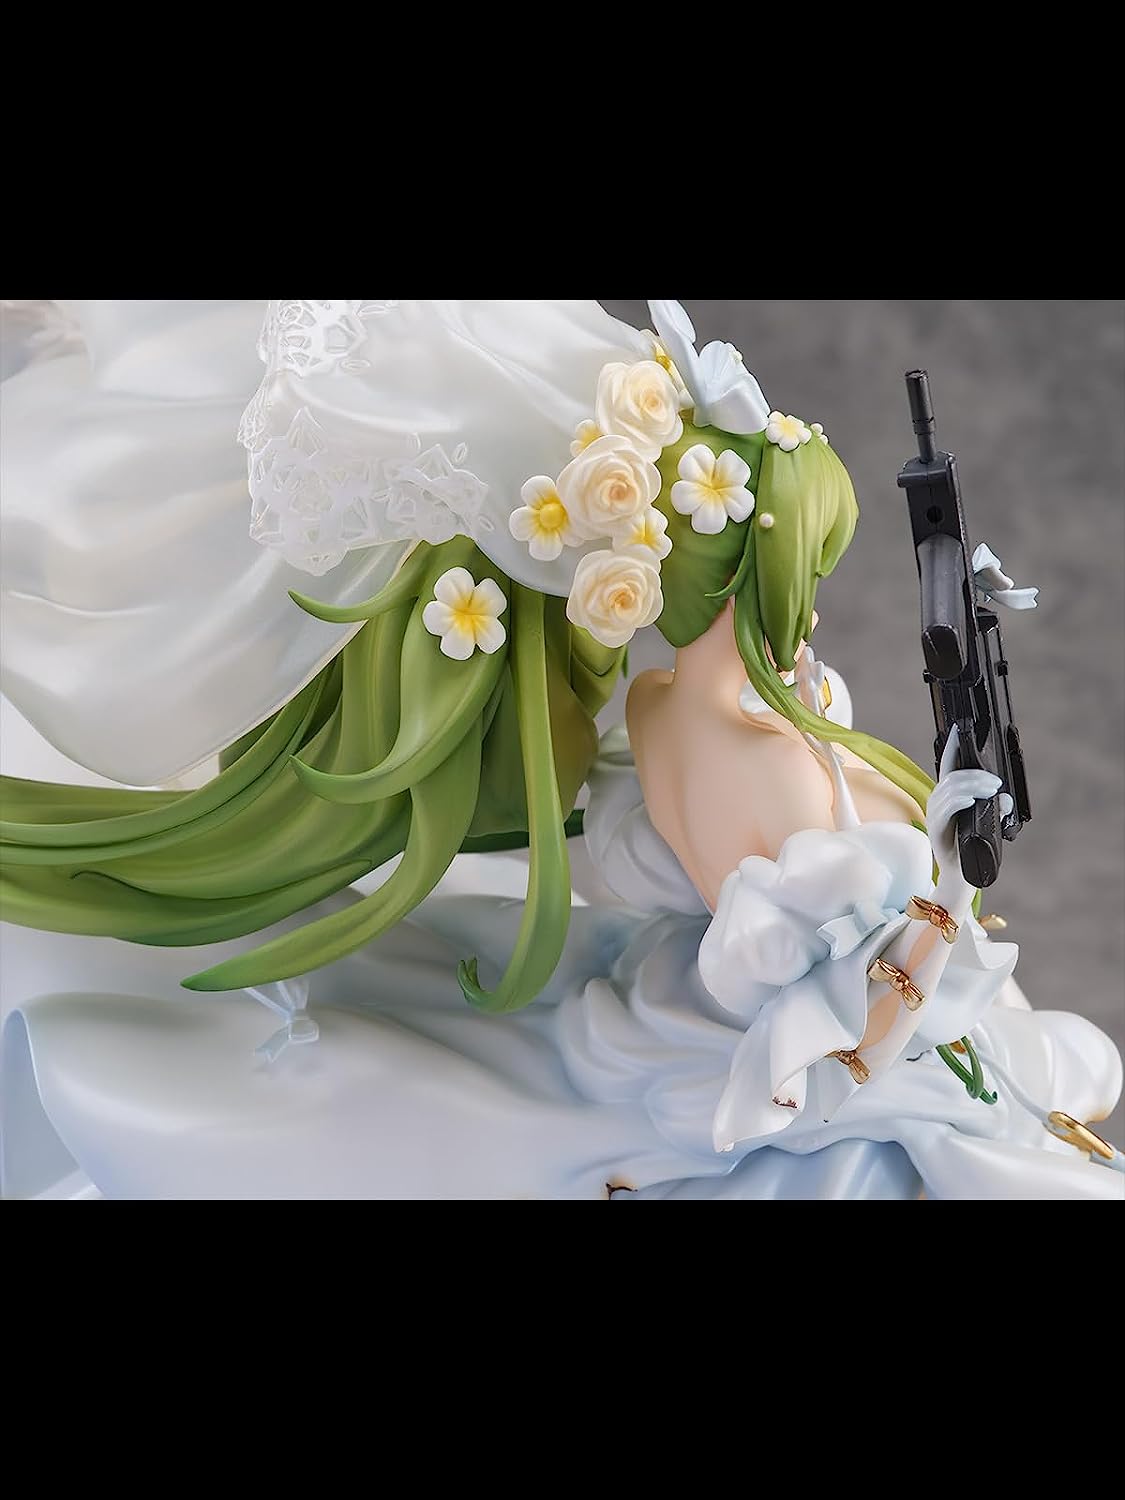 "Girls' Frontline" M950A The Warbler And The Rose -Damaged Ver.- 1/7 Complete Figure | animota